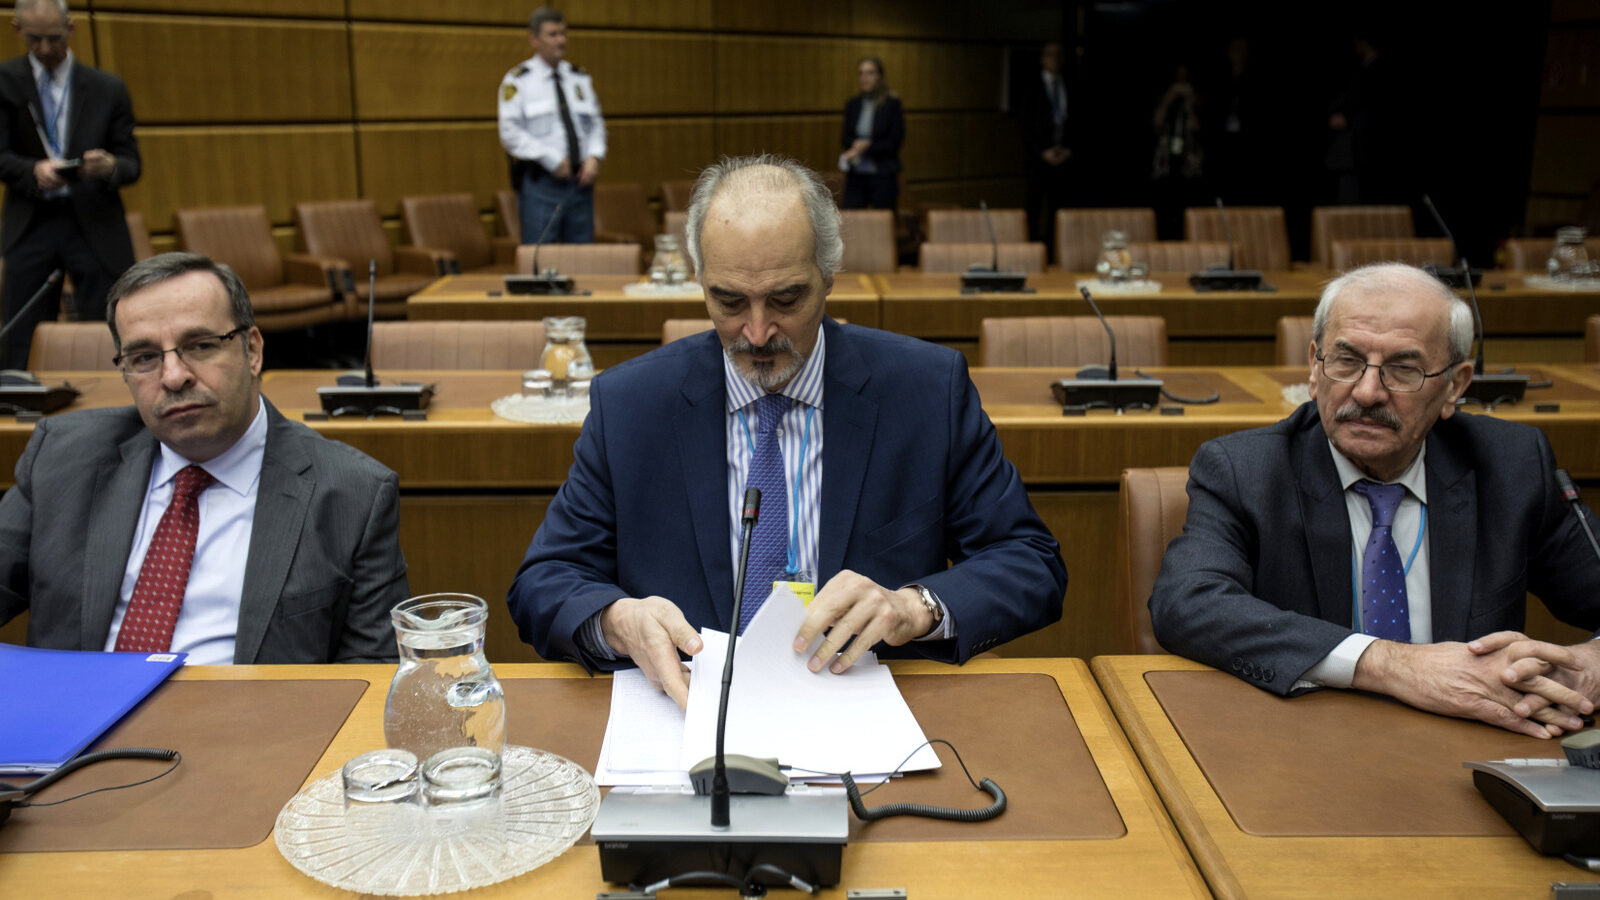 Syrian chief negotiator and Ambassador of the Permanent Representative Mission of Syria to the United Nations, Bashar al-Jaafari, centre, sits sits with members of Syrian delegation before the start of official talks on Syria, in Vienna, Austria, Jan. 25, 2018. (Alex Halada/AP)